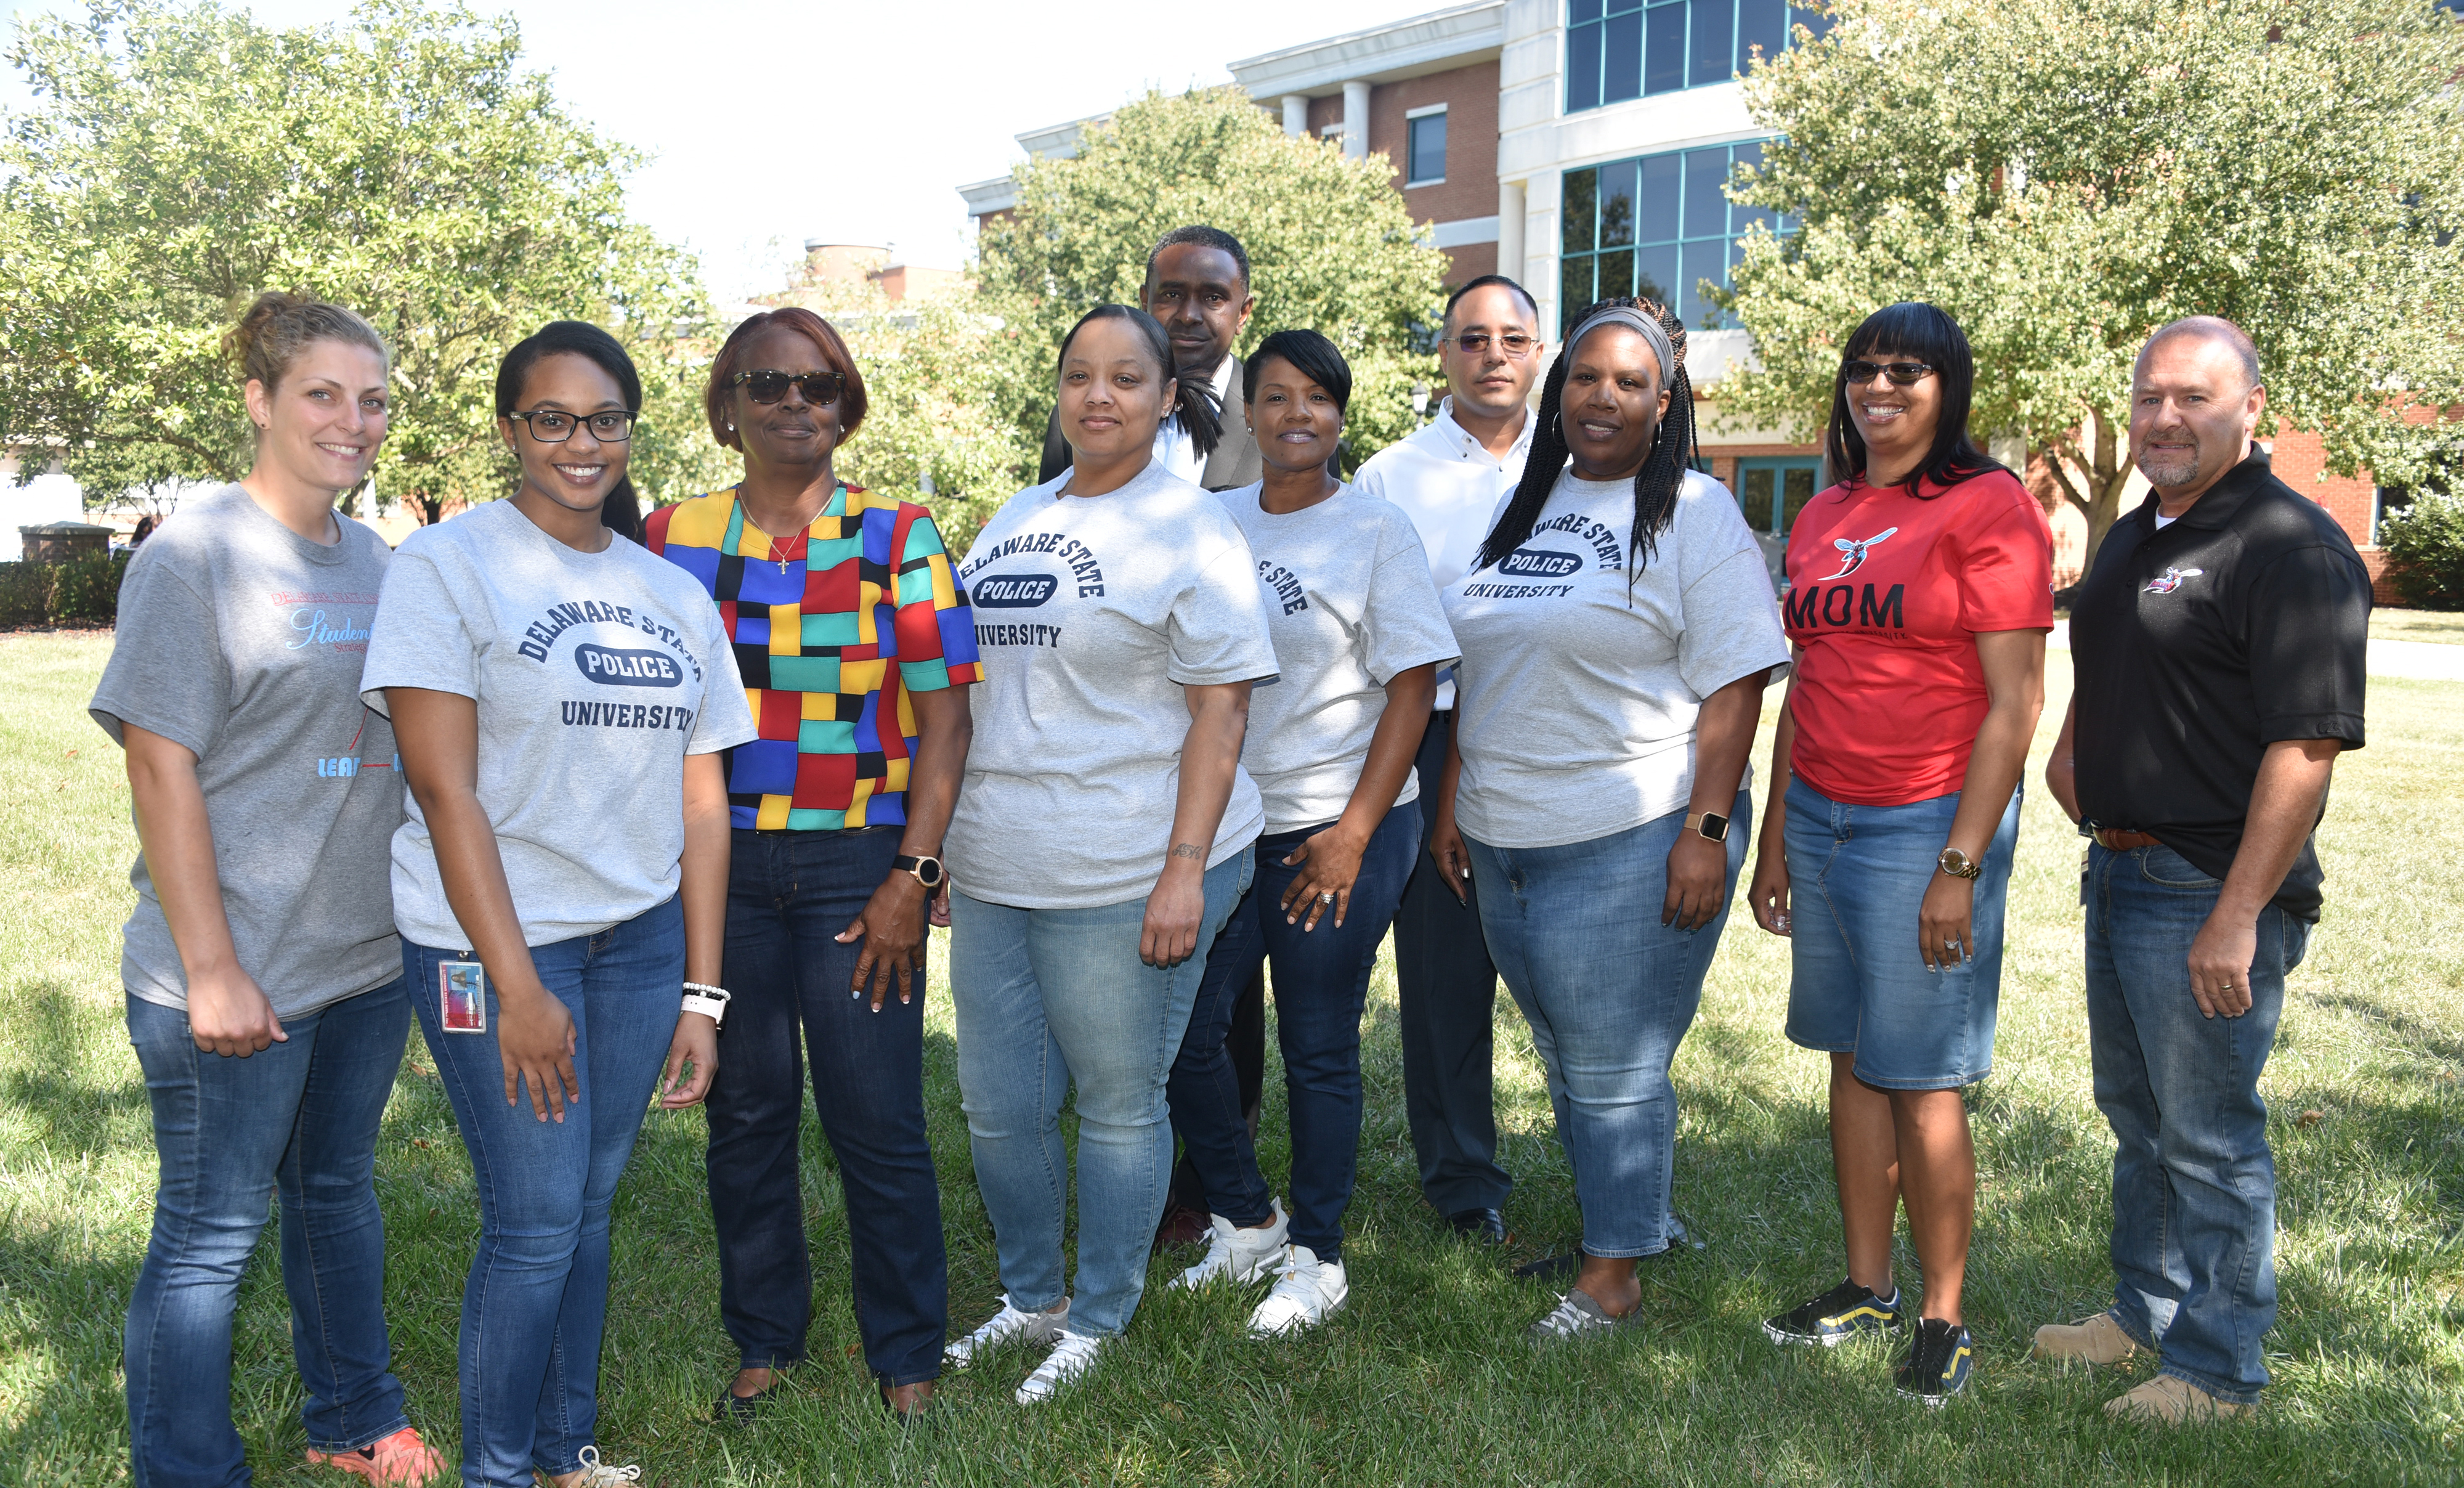 Members of the University Police Department show off their jean fashion statement in observance of "Denim Day", as part of Sexual Assault Awareness Day on Sept 25.